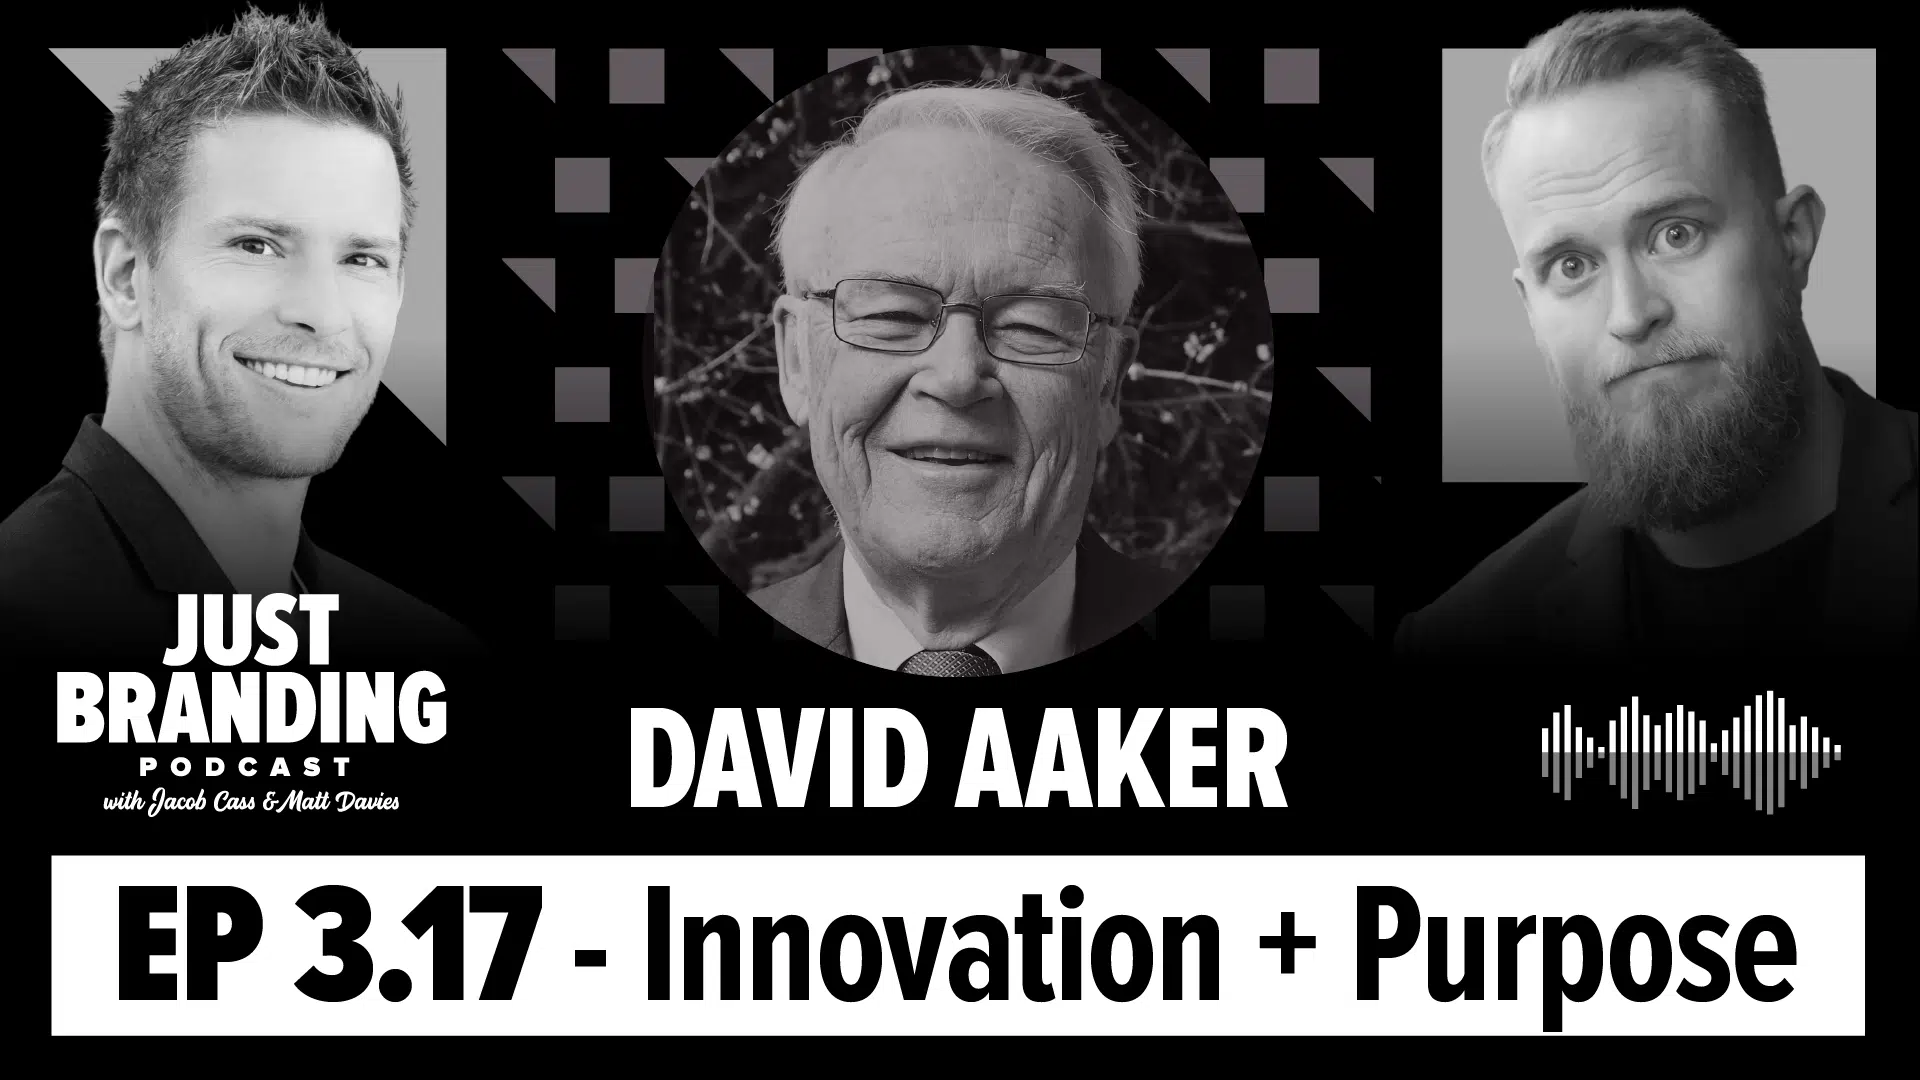 Disruptive Innovation + Purpose-Driven Branding with David Aaker